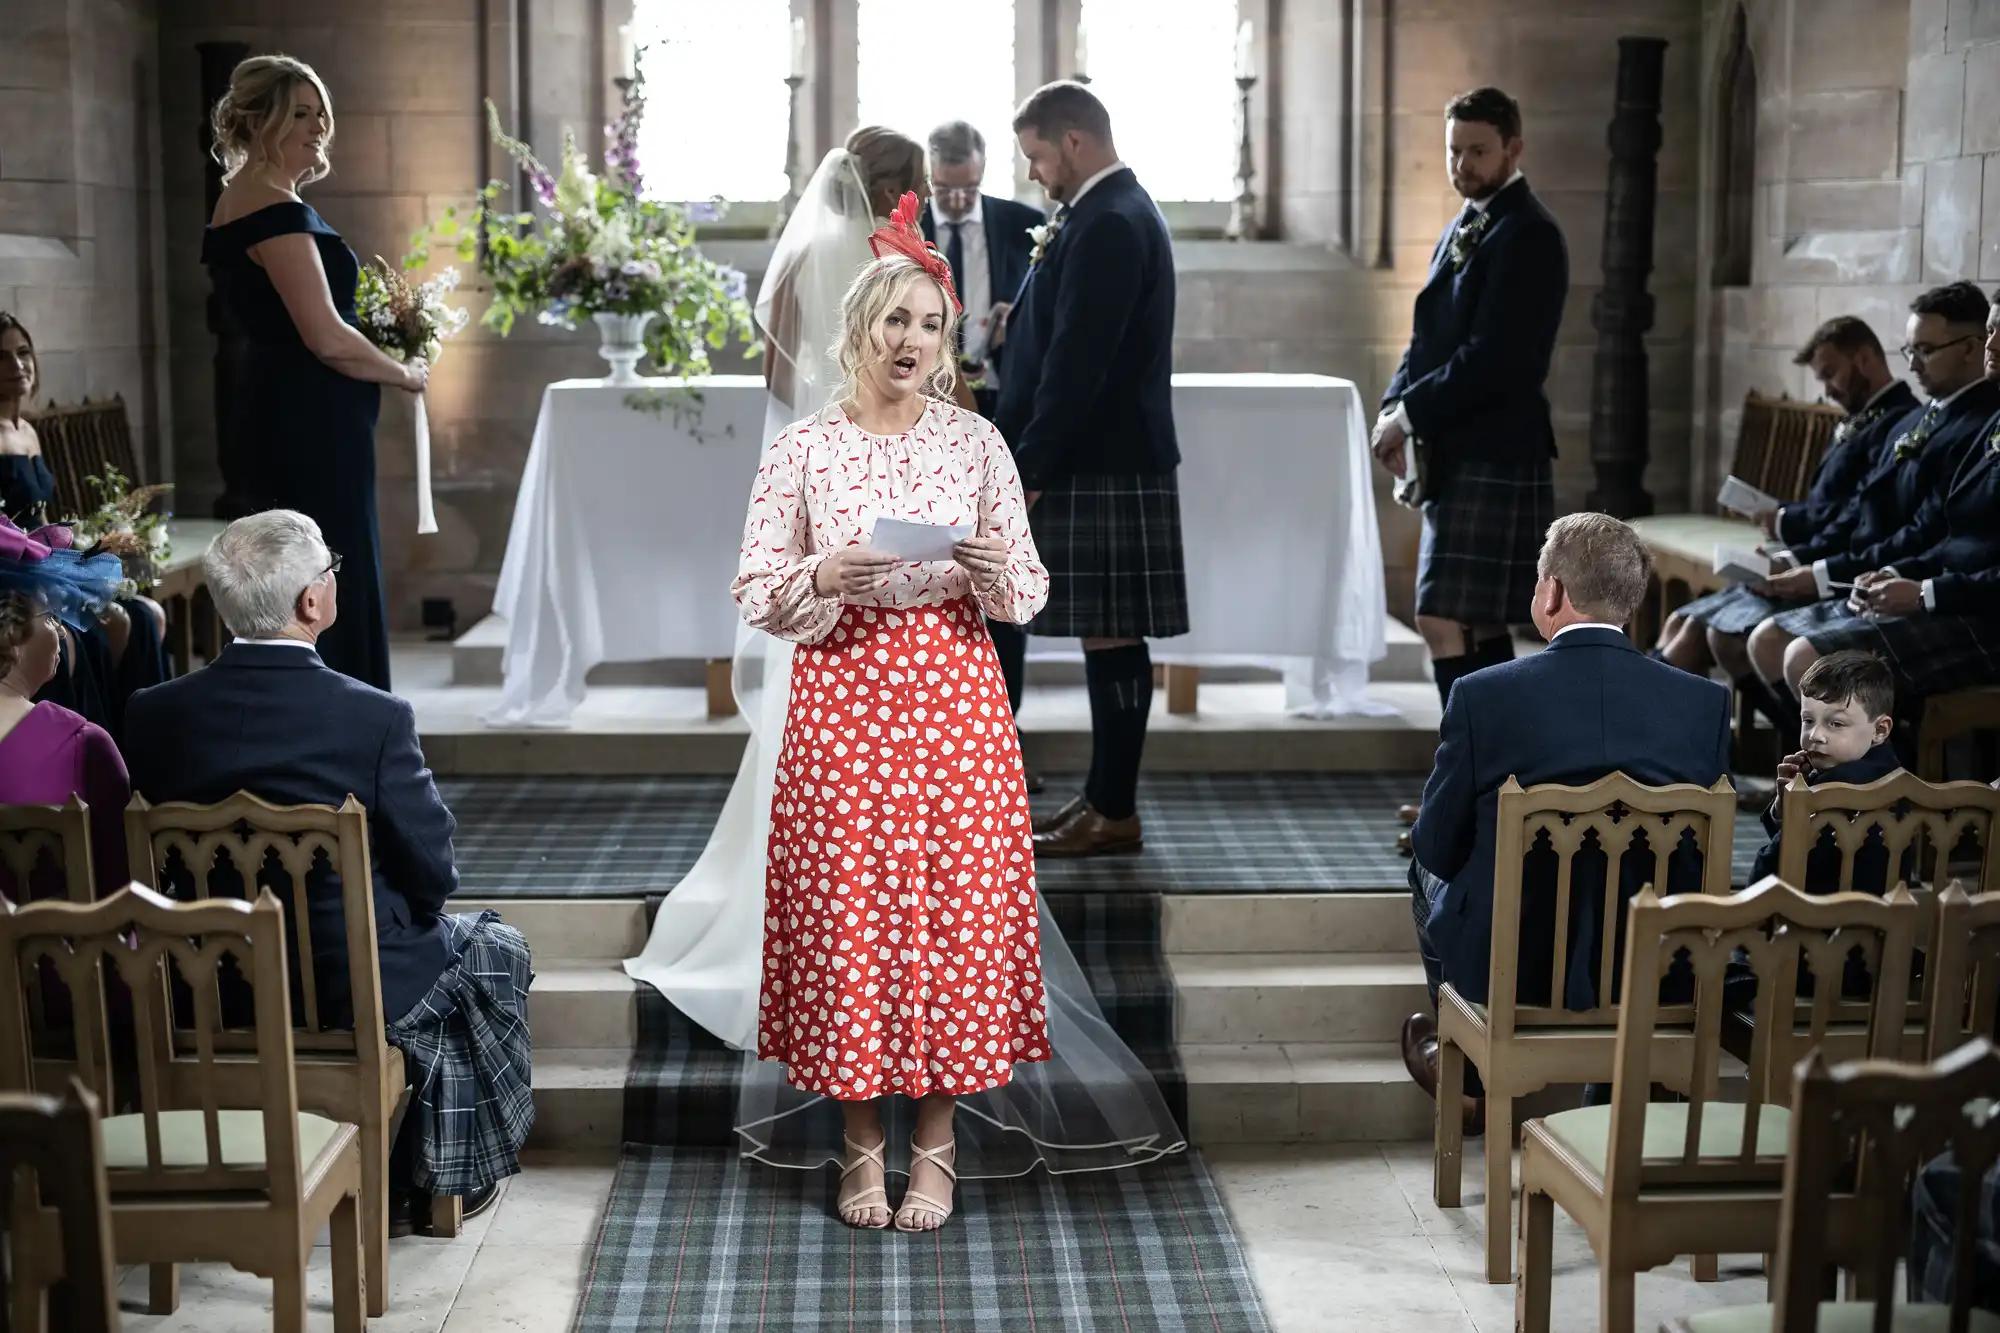 A woman in a red polka dot dress stands reading from a sheet of paper at a wedding ceremony in a stone hall, with guests in formal attire listening attentively.